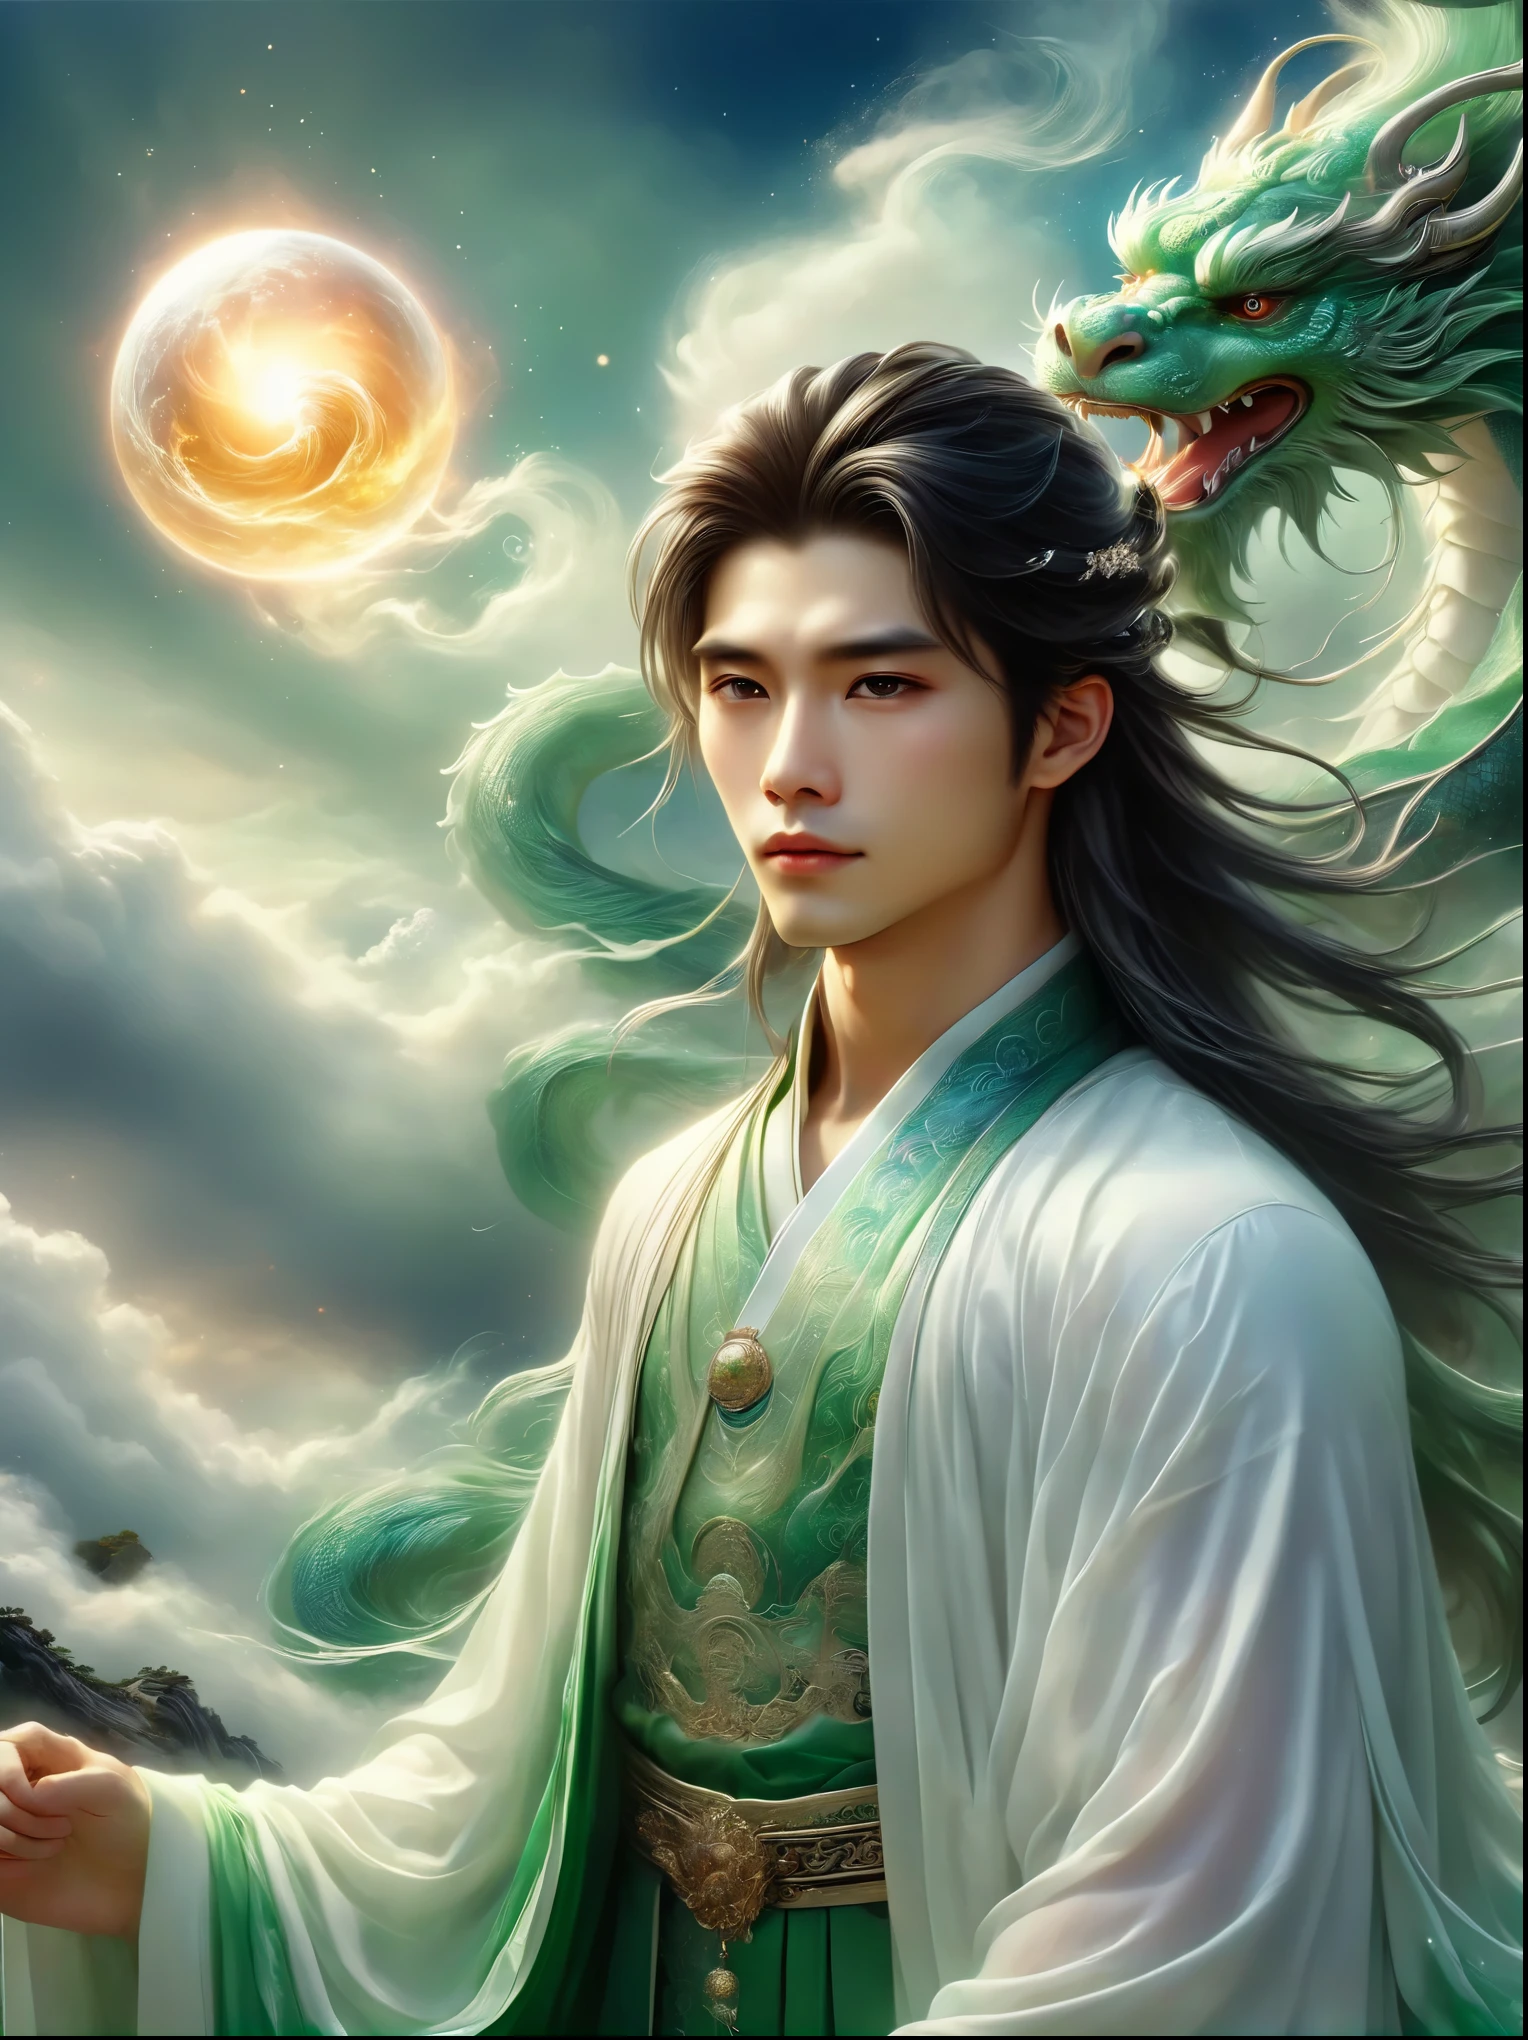 A strikingly handsome 20-year-old Chinese man with ancient long hair and delicate facial features stands atop a mountain peak shrouded in mist. Dressed in exquisite white clothes, he appears celestial, almost immortal. His left hand is raised above his head, clutching a shimmering luminous green orb. His figure faces away from the viewer, towards a gigantic mythical blue Chinese dragon that is emerging from the clouds of a looming storm. The setting sun hovers in the background, providing a sharp focus and perfect composition to this scene. Incorporate elements of absurdity and elegance with high detail and volumetric mist for an intricate, award-winning photo effect. Emphasize the details with high contrast and cinematic lighting, mimicking the high-resolution quality of a Fujifilm XT3. The image should simulate an 8k UHD quality with a grain of film effect for a captivating ultra-realistic rendering.